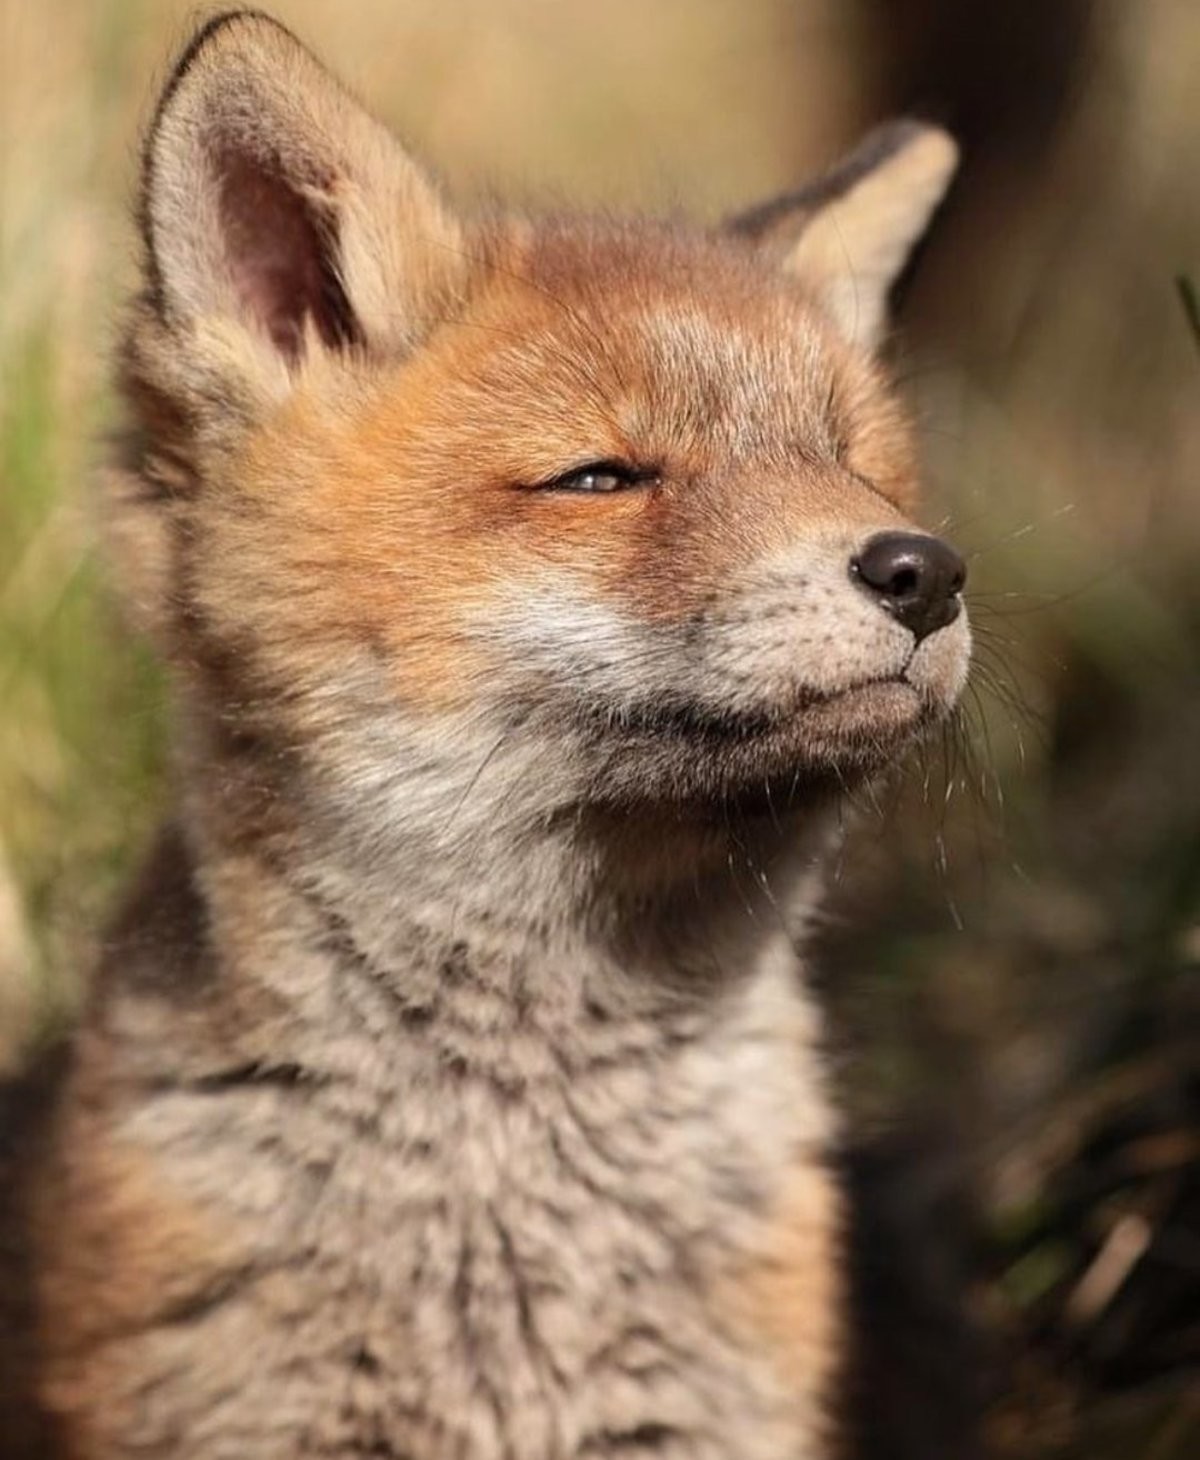 Idk how to describe what emotion i think this fox is feeling. .. &gt;looking at the sunset, remembering that time you and your brother caught your frist frog. &gt;it tasted terrible &gt;but now, you remember it fondly